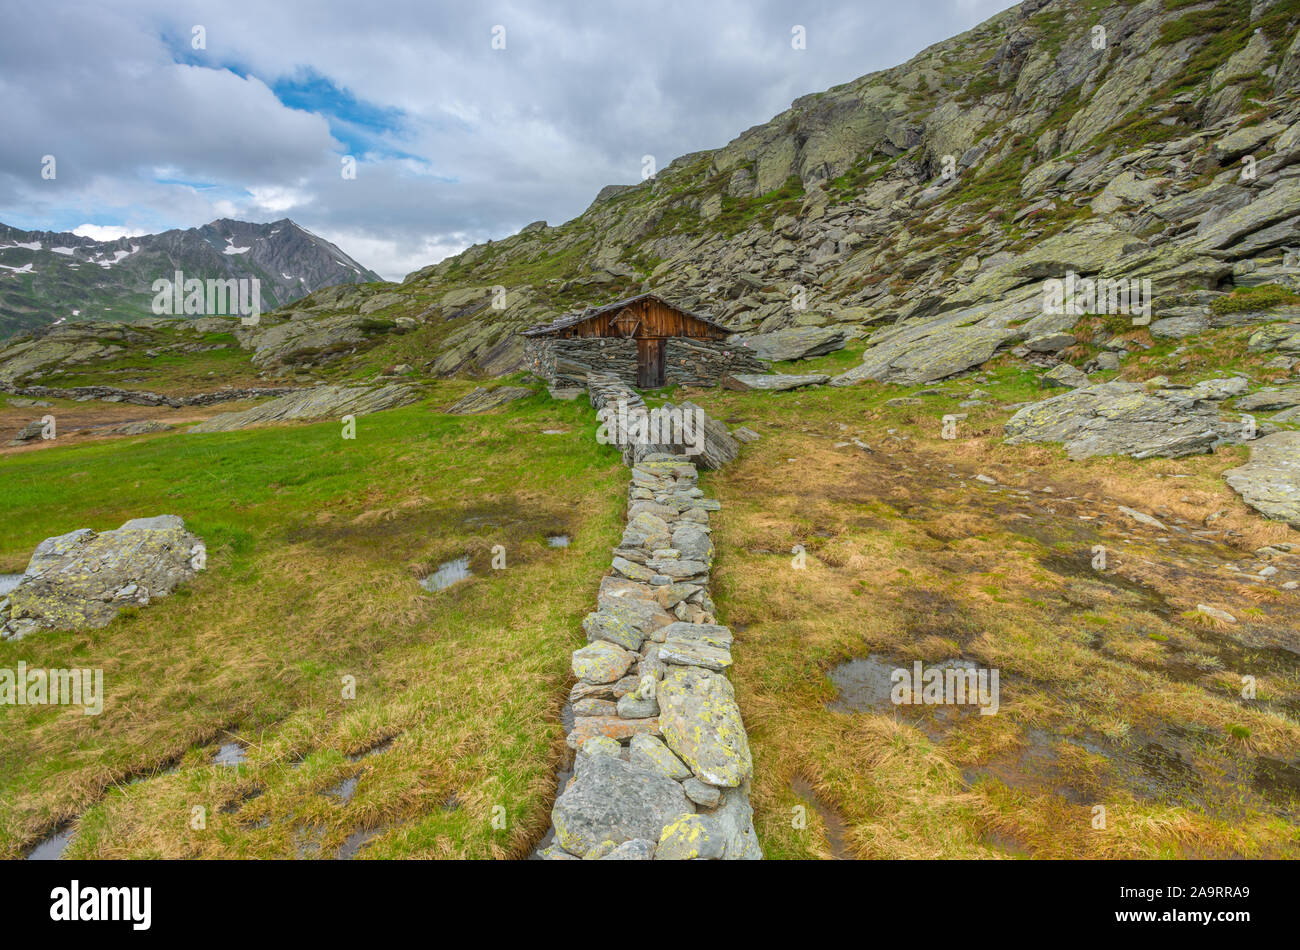 Old stone cabin along stone wall. Old mountain hut built of stone, sheepherder shelter up the mountains. Ancient dwellings in the Alps. Stock Photo